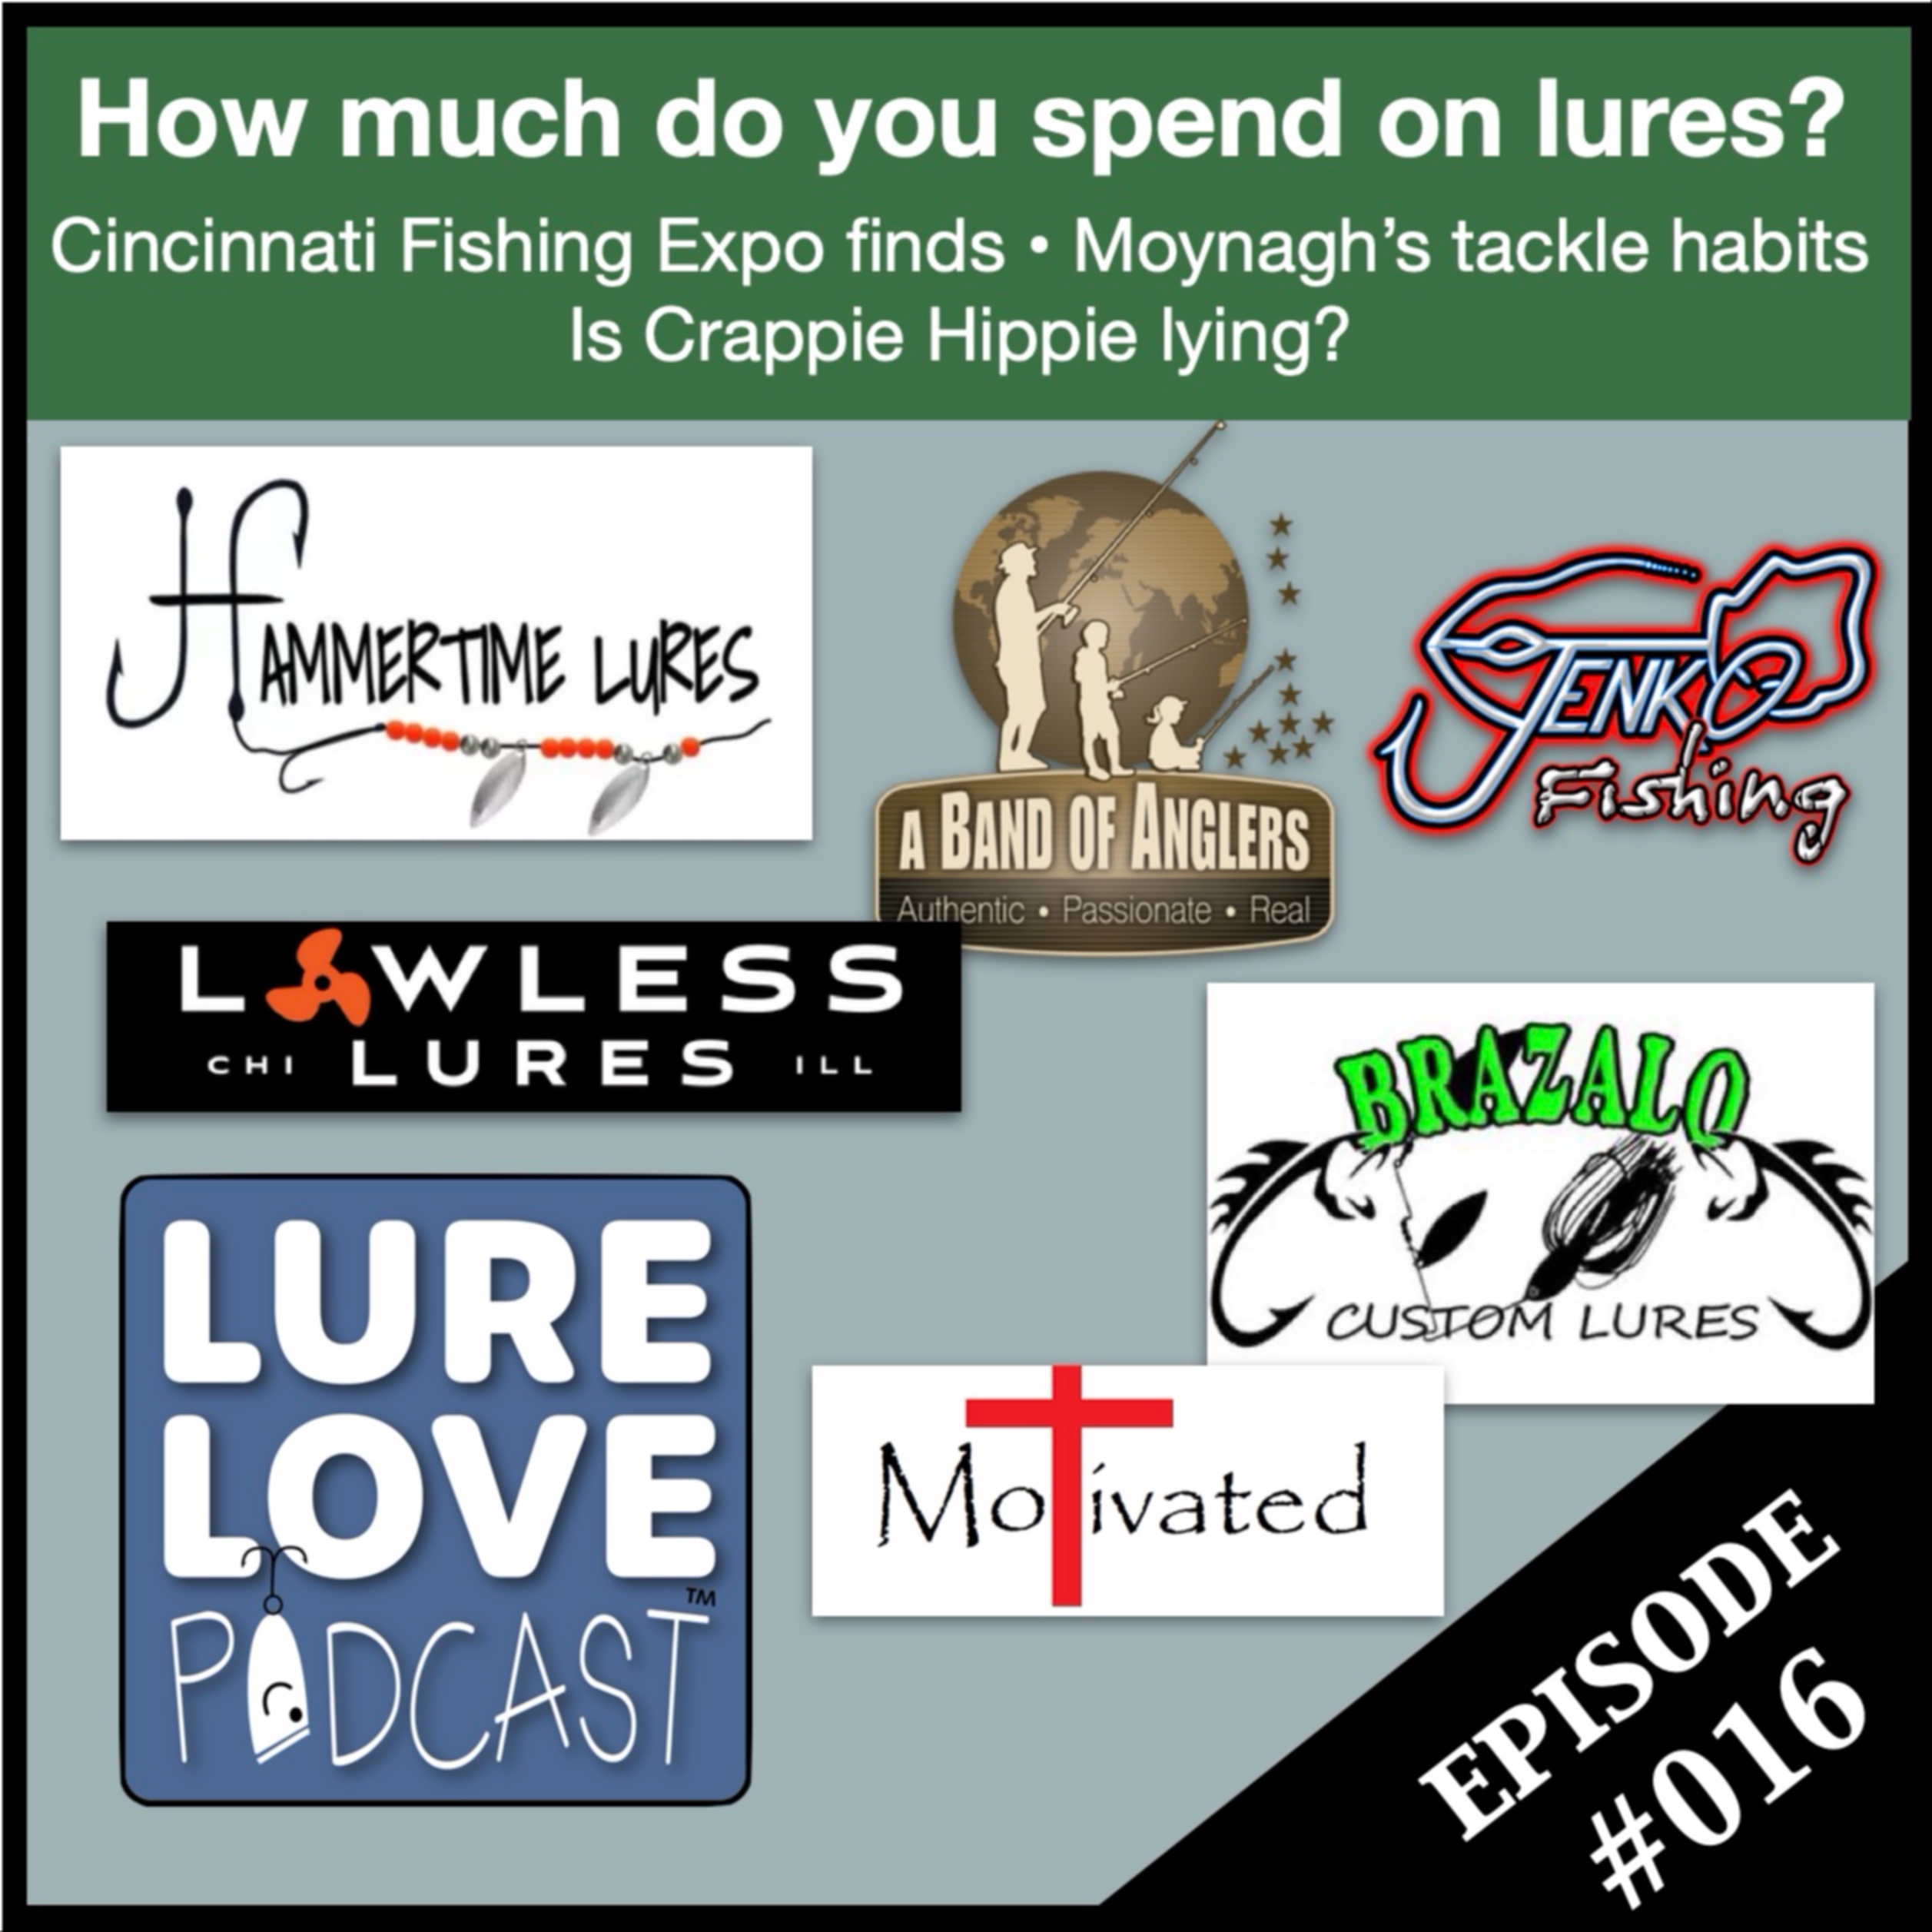 How much do you spend on fishing lures?